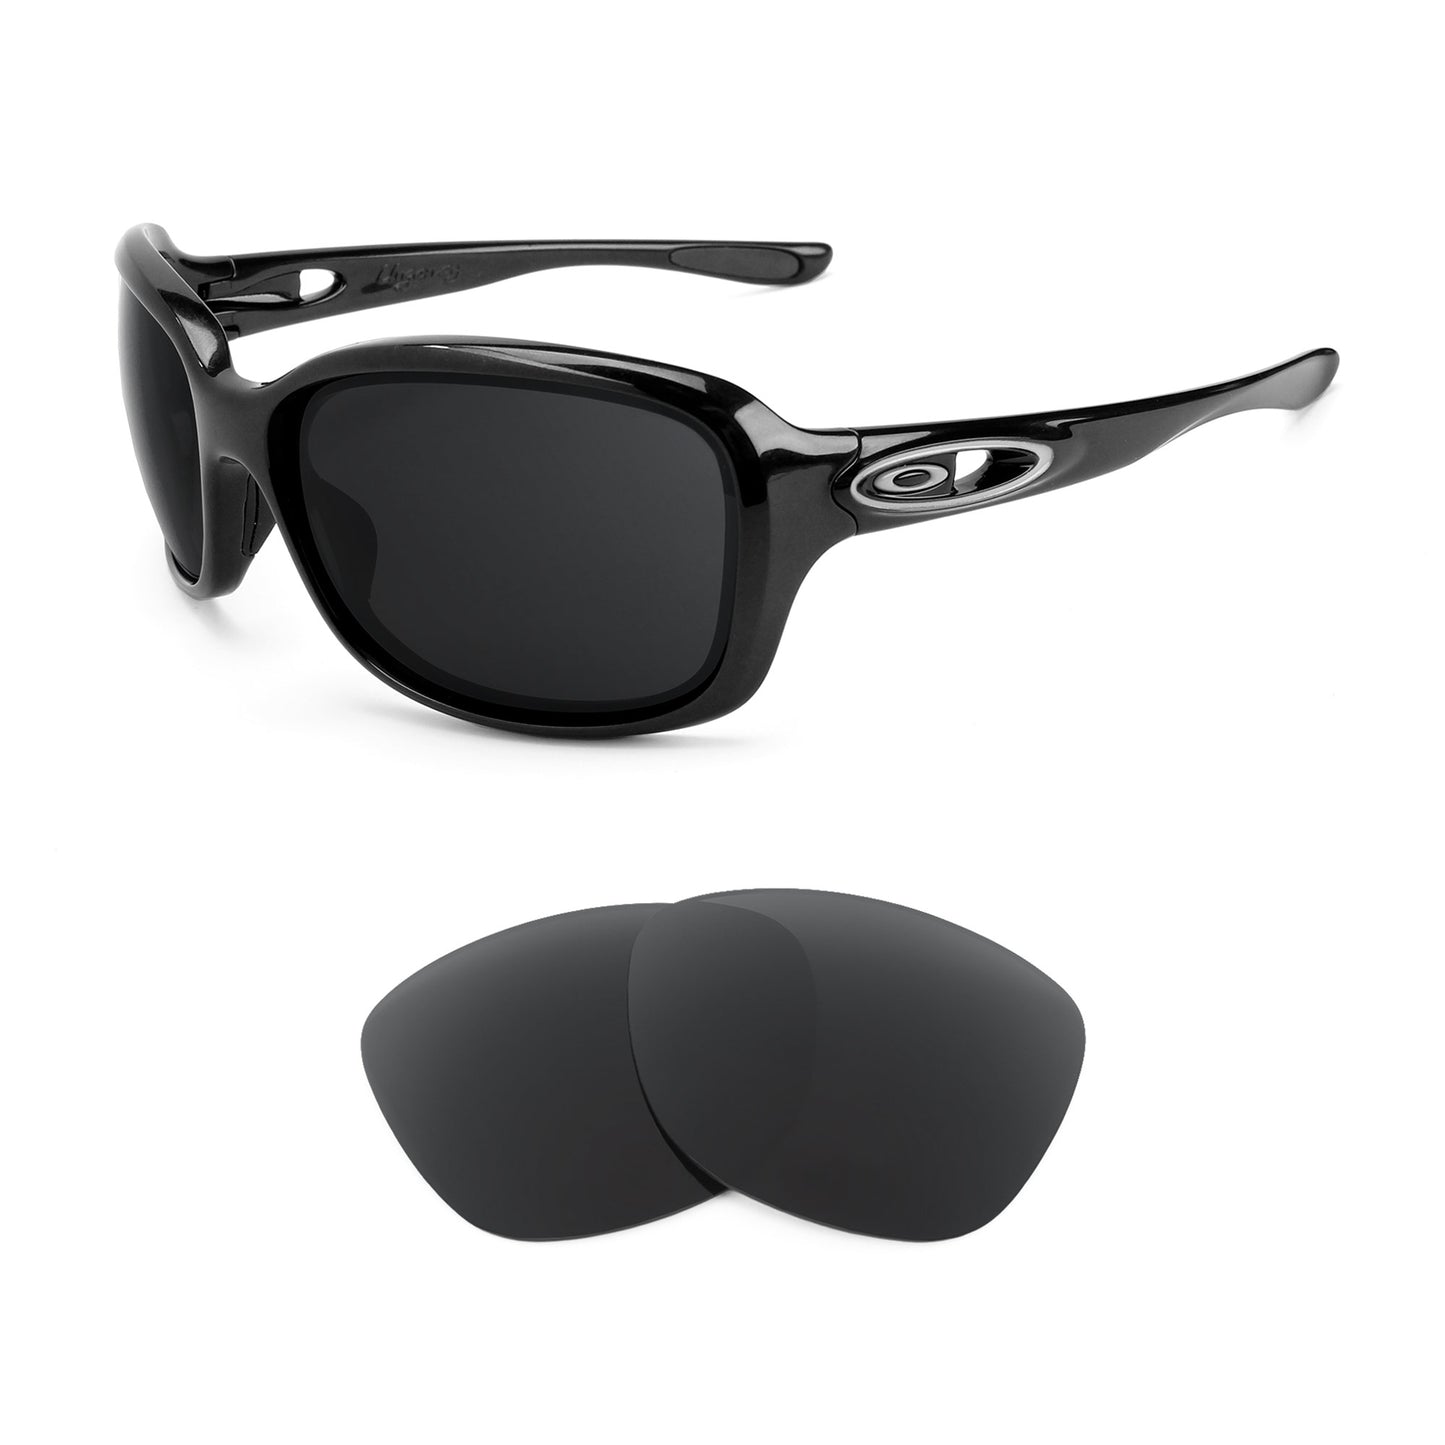 Oakley Urgency sunglasses with replacement lenses